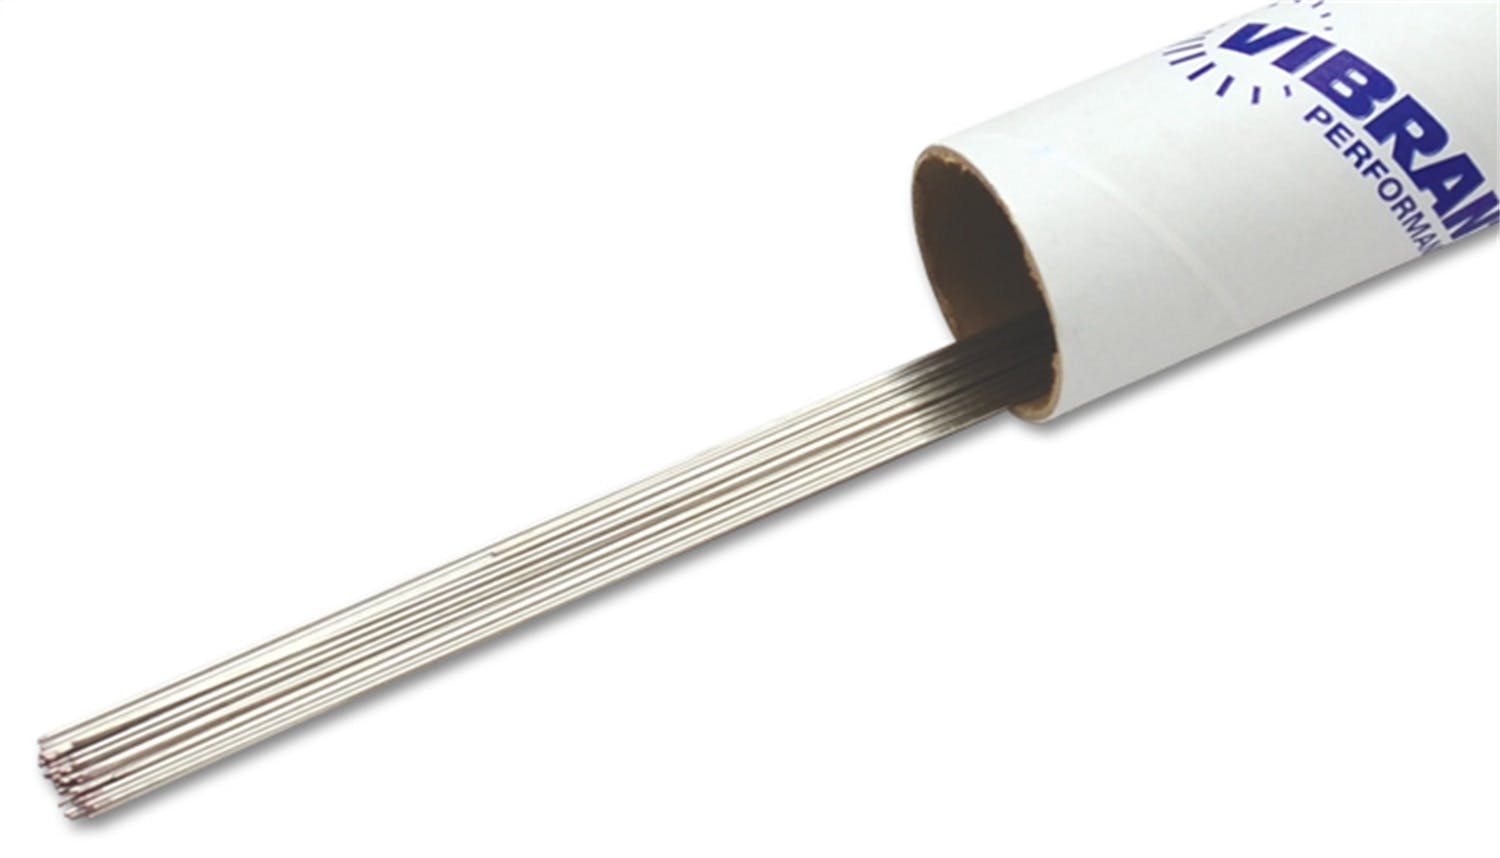 Vibrant Performance 29233 Wire Stainless Steel ER309L - 0.035 inch Thick (0.9mm) - 39.5 inch Long Rod - 3lb box